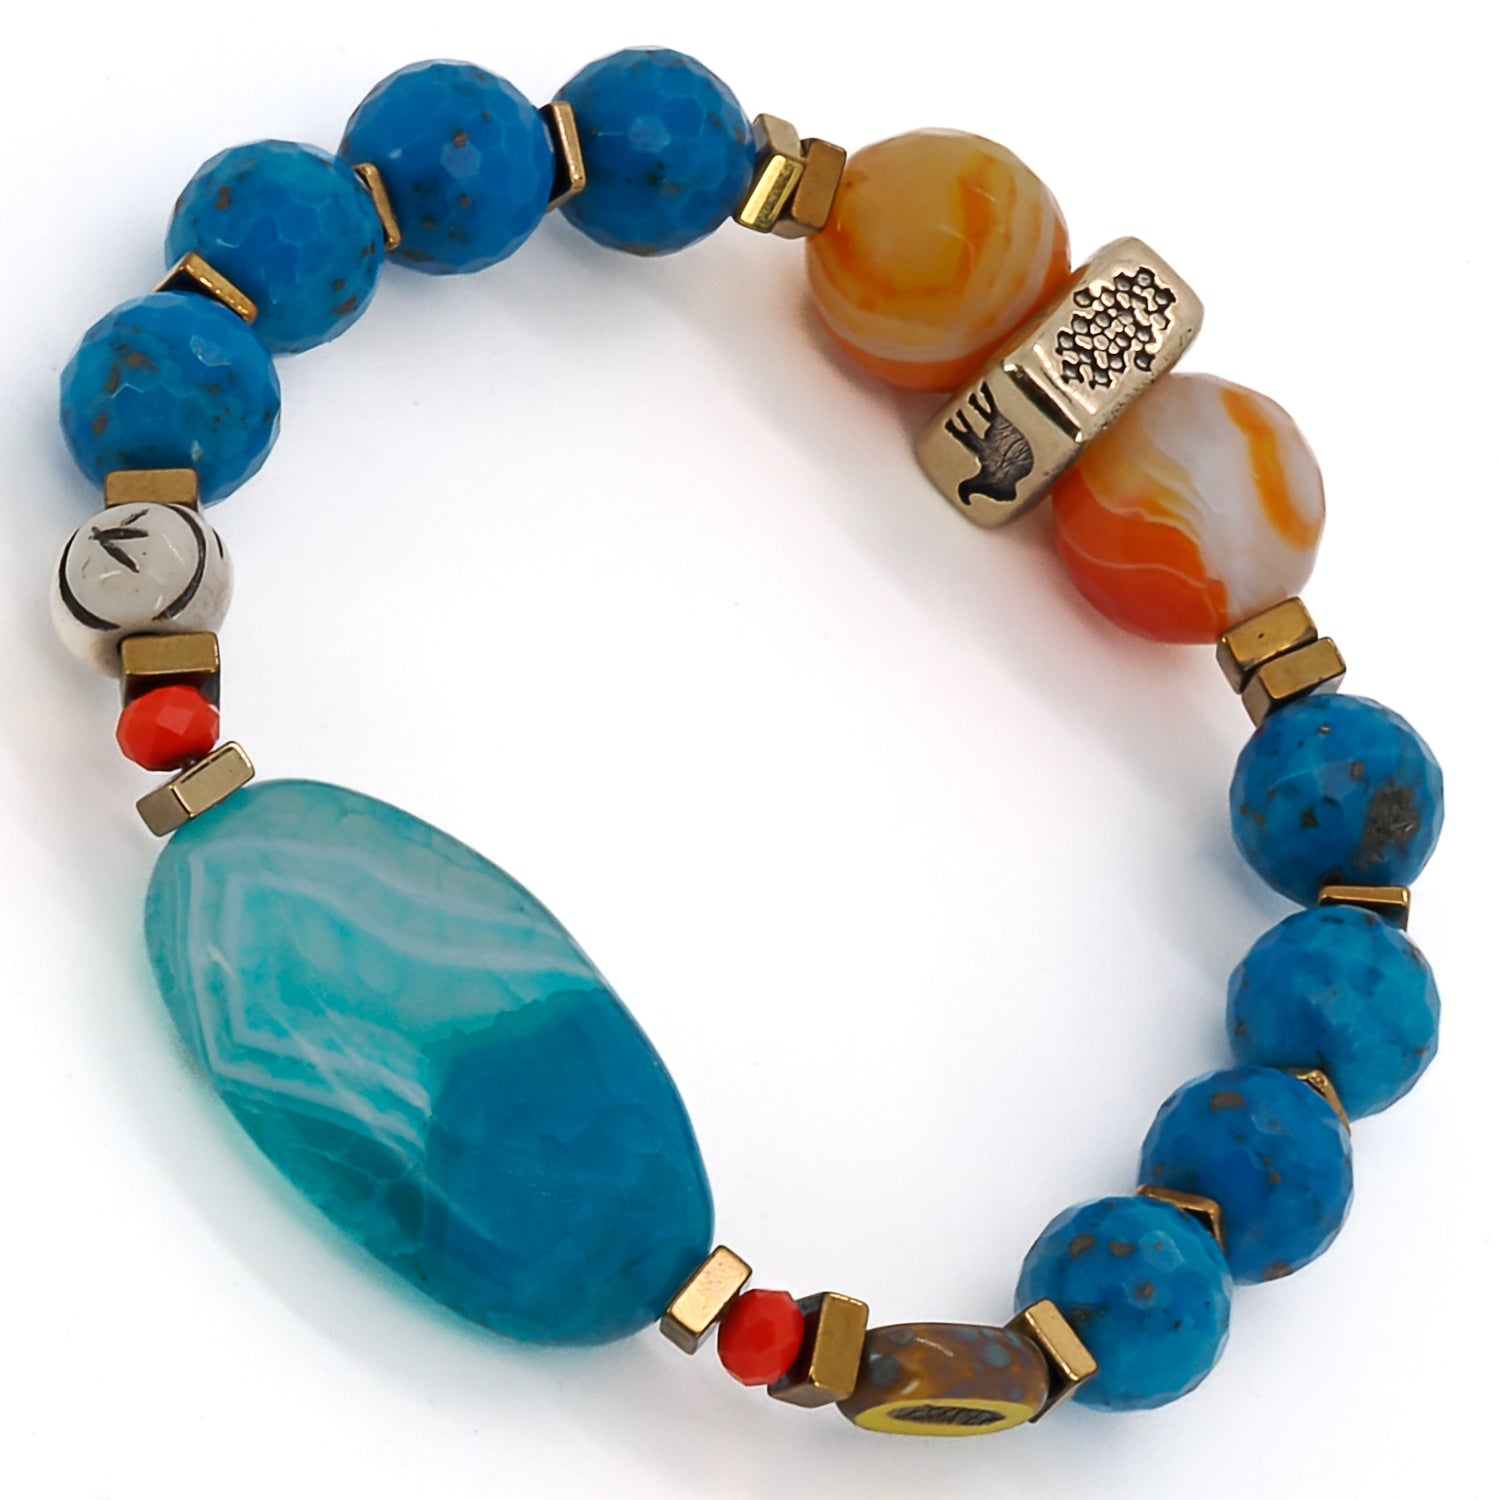 The Blue Agate stone is said to promote balance and harmony, while the other stones and beads are thought to have their own unique energy properties as well.